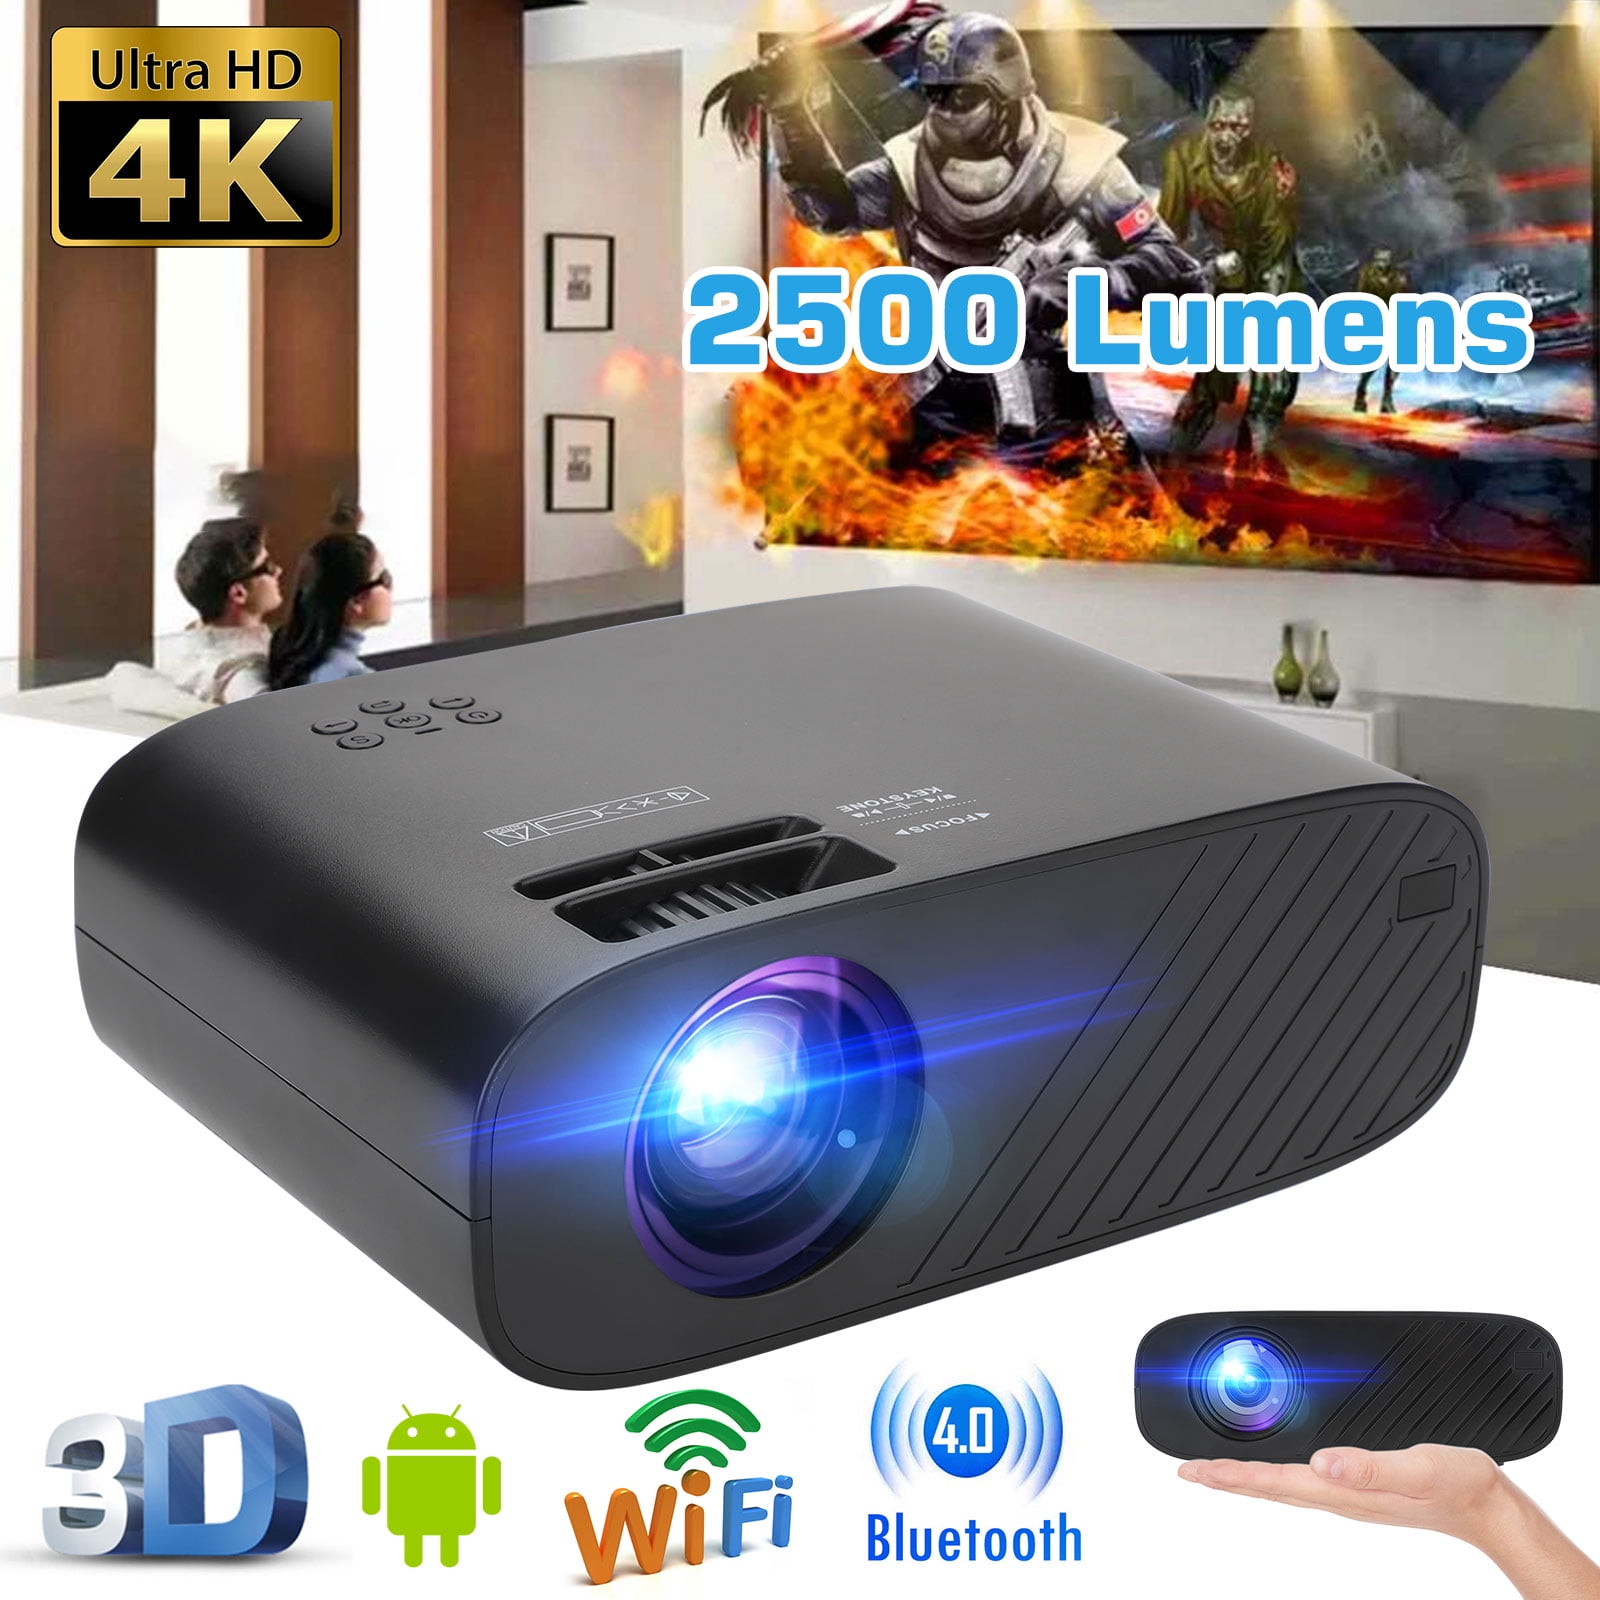 2500 lumens Android WiFi 4K Video Projector LCD LED Full HD Theater